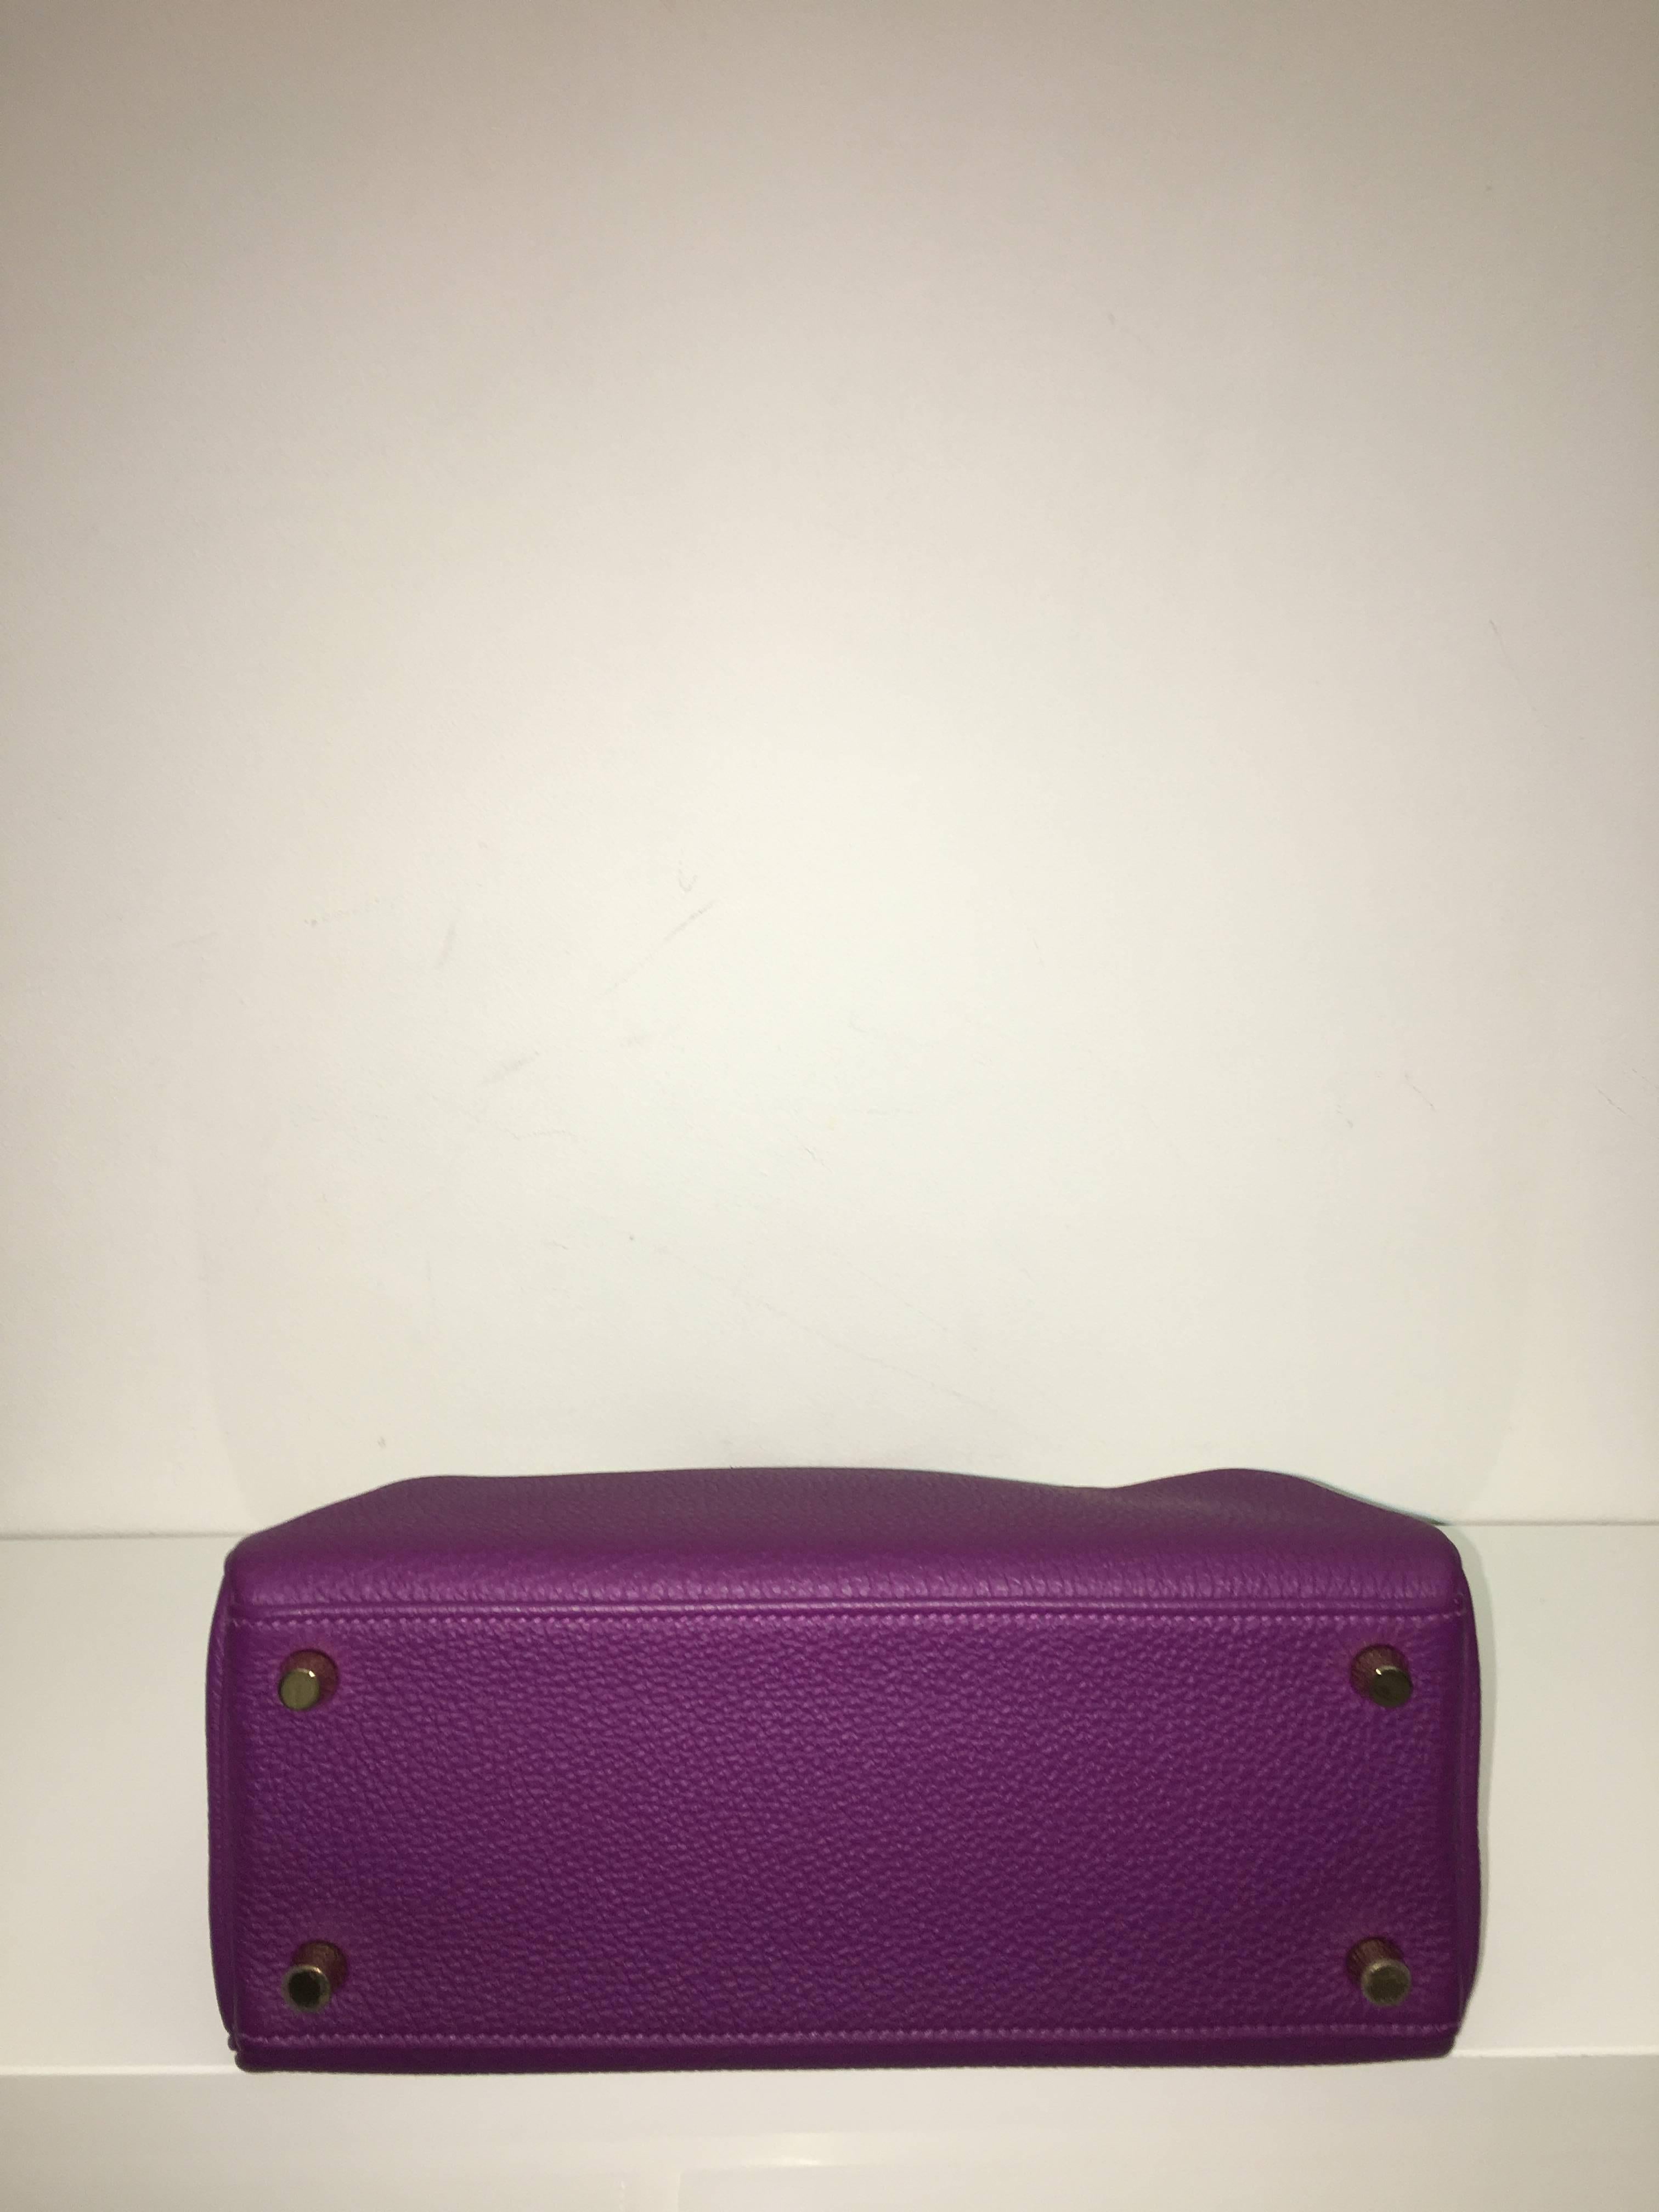 Purple Brand New Hermes Kelly 25 Anemone Togo GHW For Sale